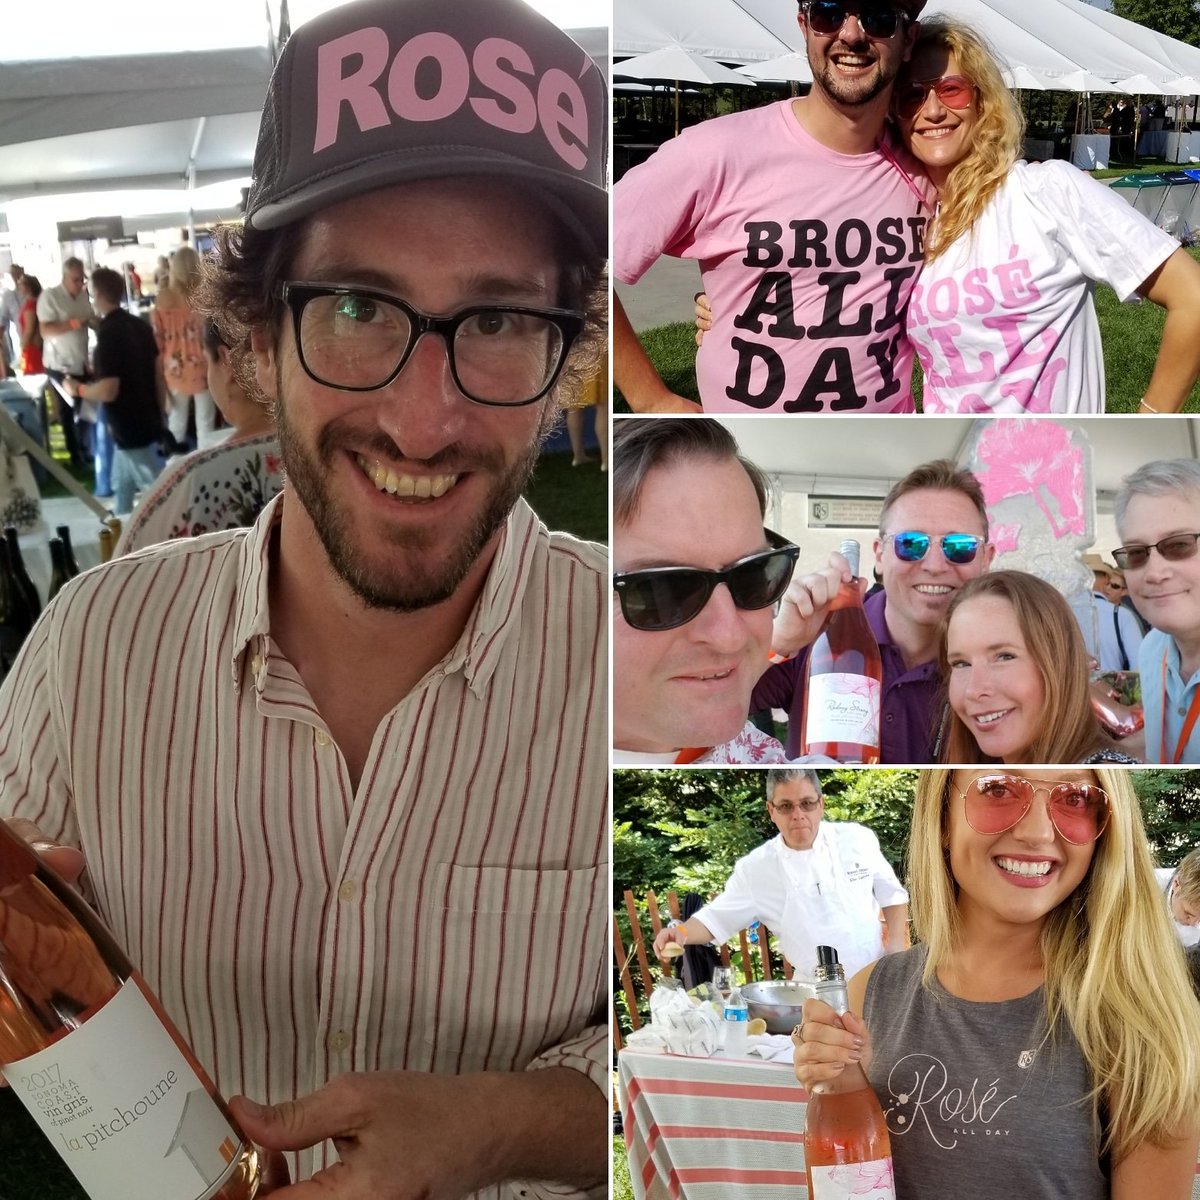 This just in: On #LaborDay, it's time to #pinkout! This message provided by #SawyerSomm, #RodneyStrong #LaPitchouneWinery and all the other #pinkwine fans at #TasteofSonoma! #roseeveryday #broséallday #rosealltheway #SonomaVintners #sonomawine #CaliforniaWineMonth #MyWineSociety